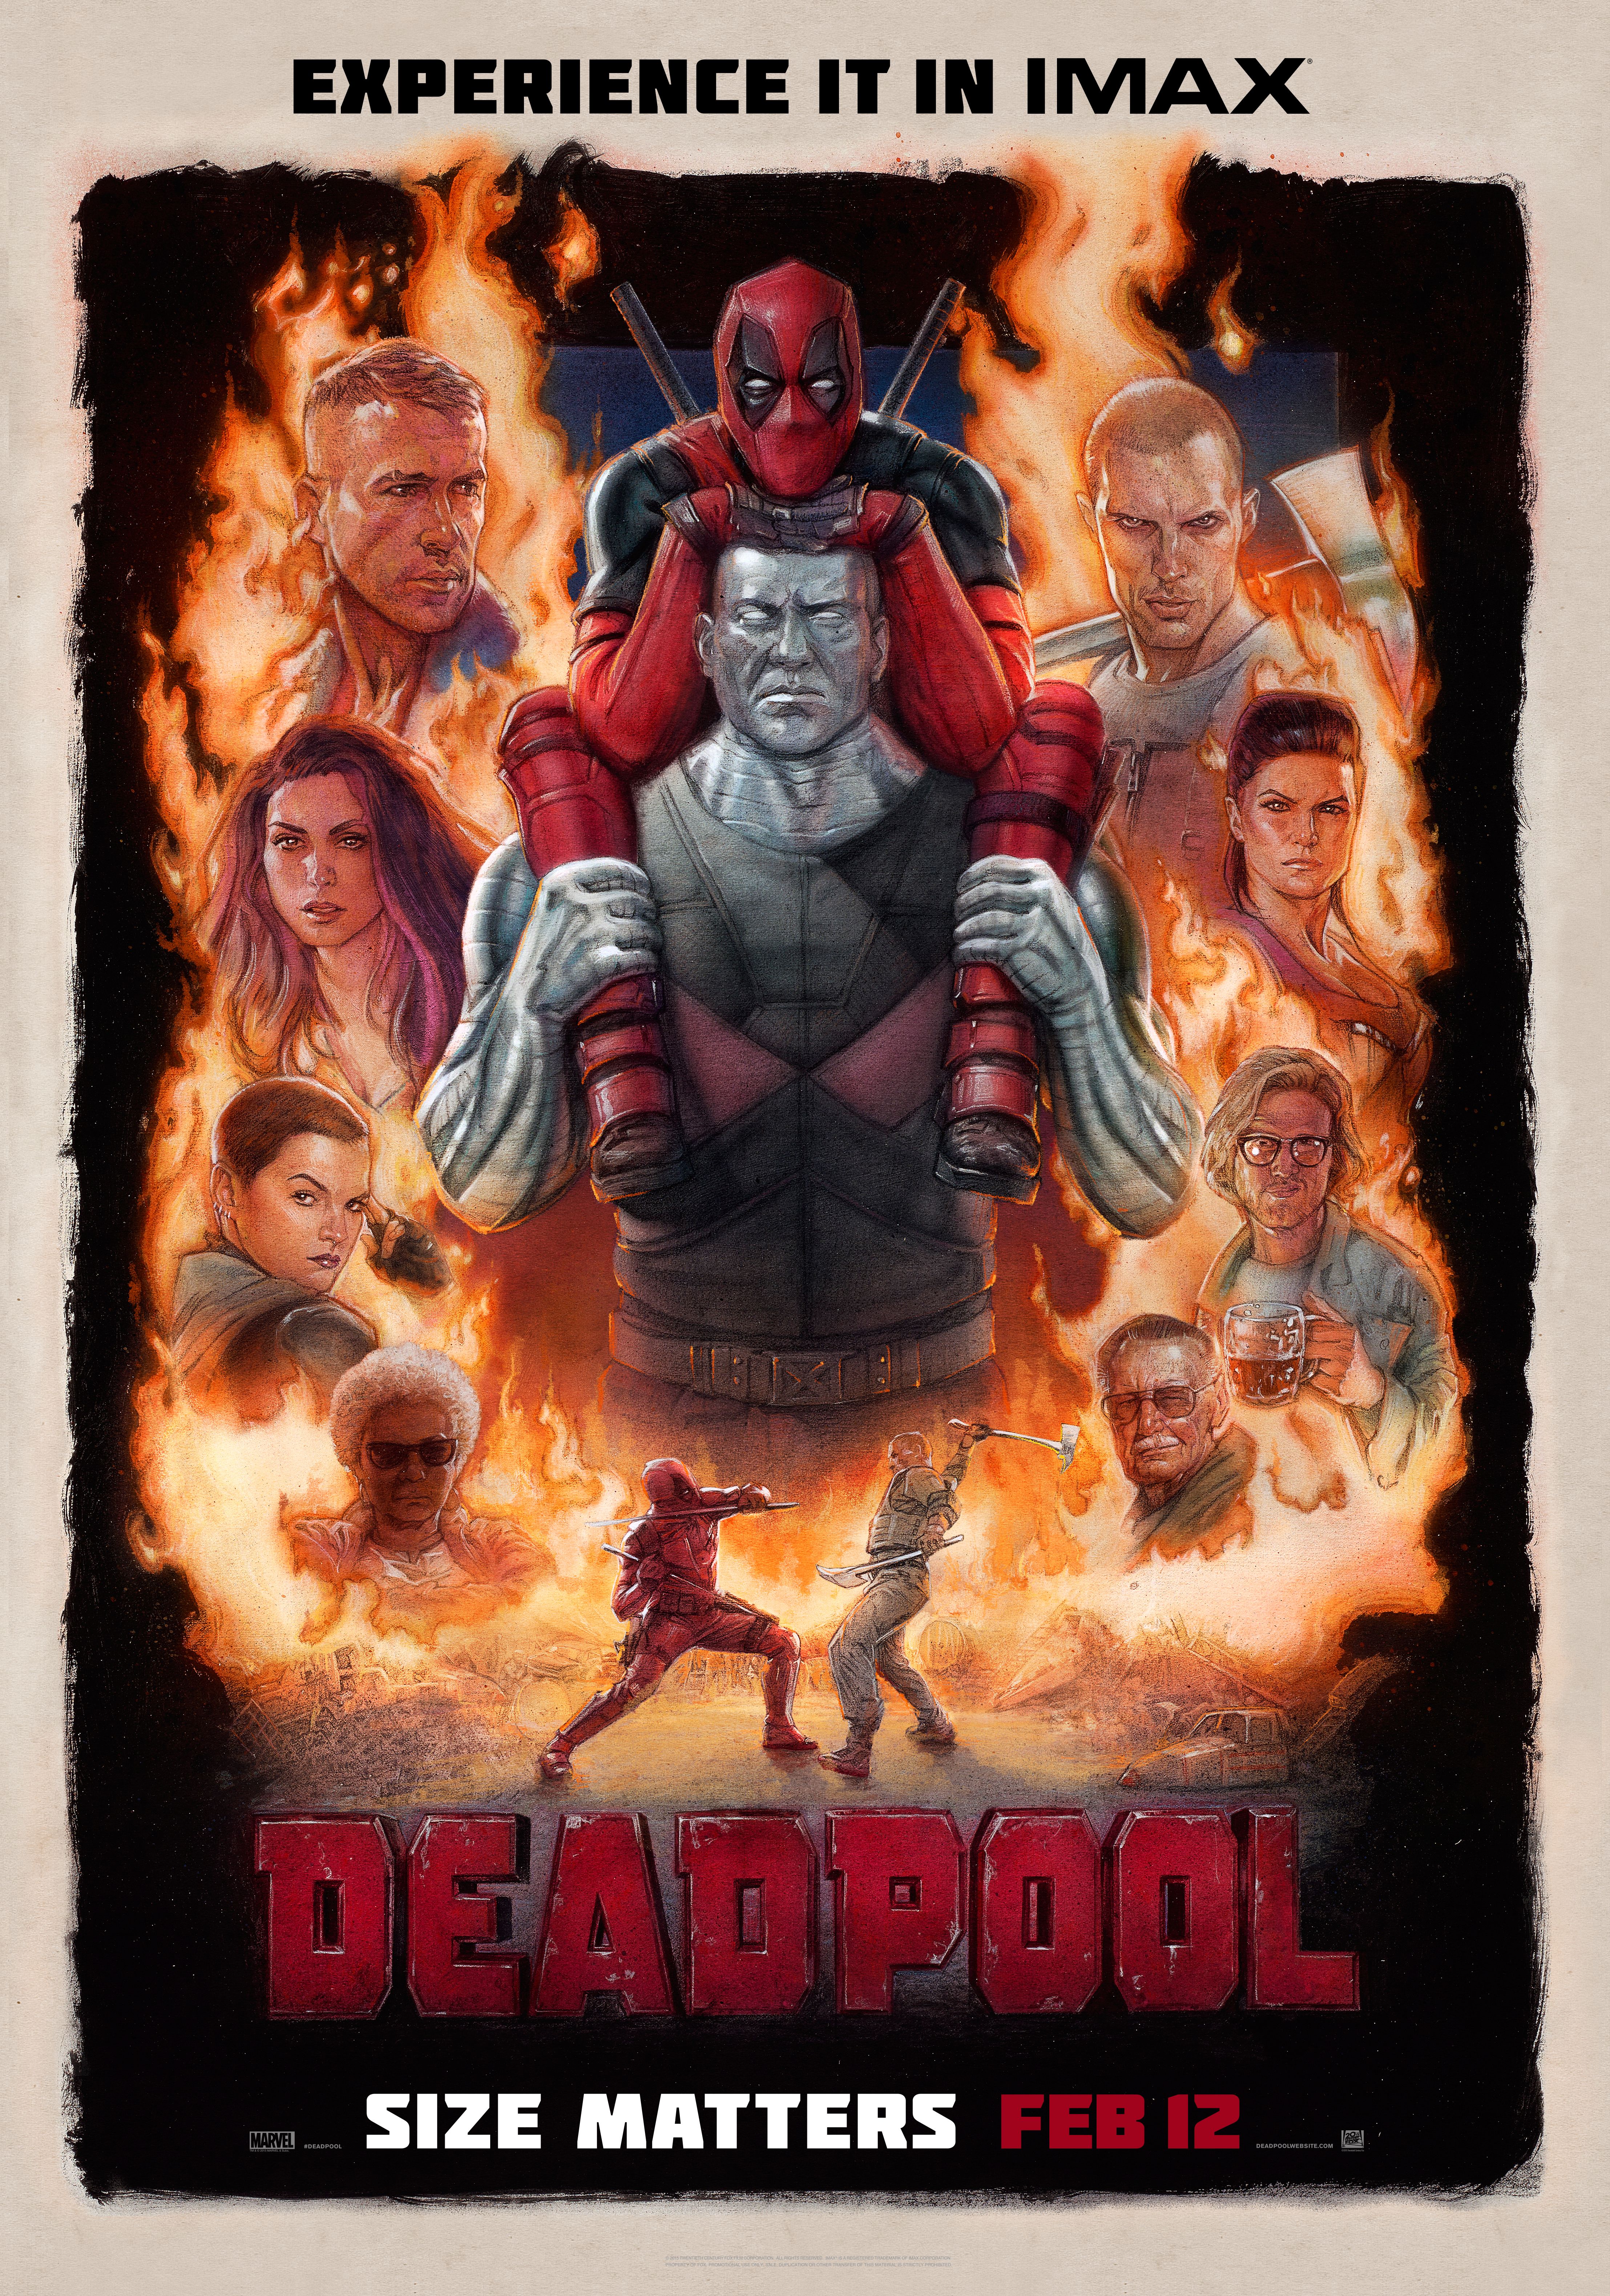 Deadpool Colossus Actor Stefan Kapicic Shines In New Images